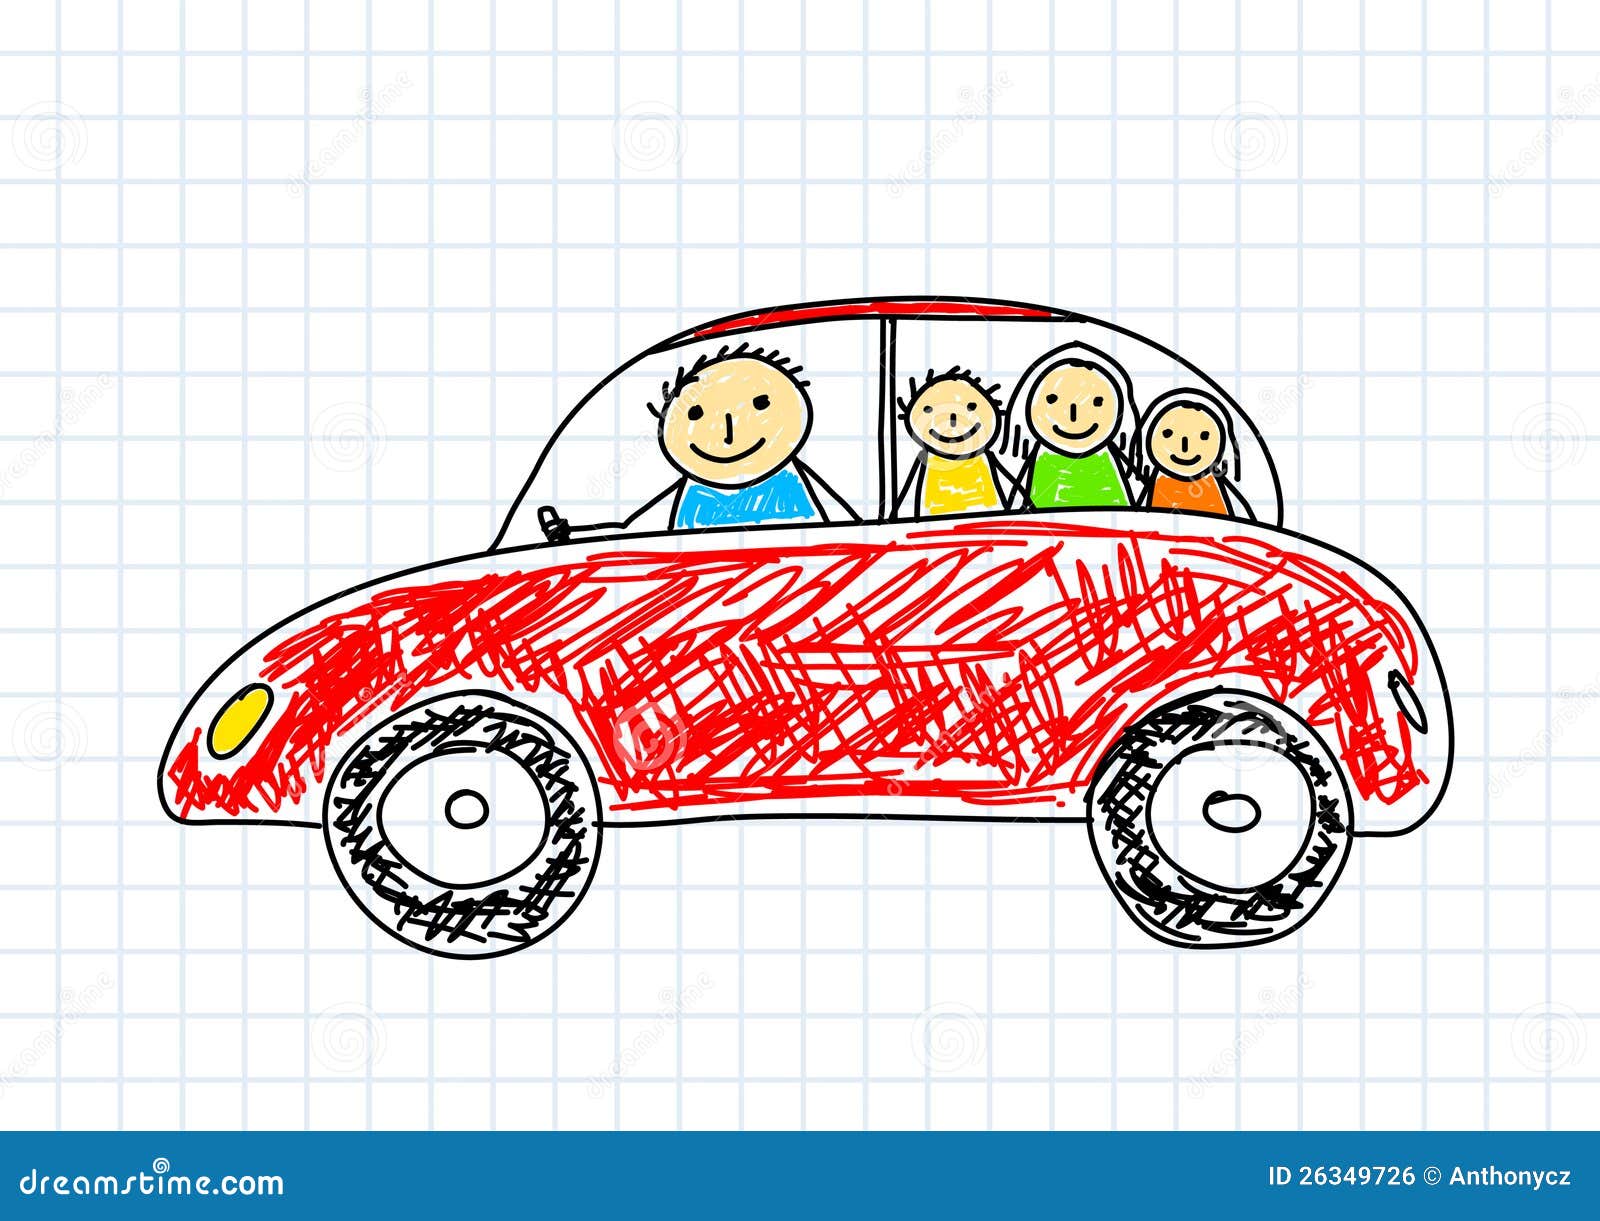 Drawing Of Red Car Stock Vector Illustration Of Transport 26349726